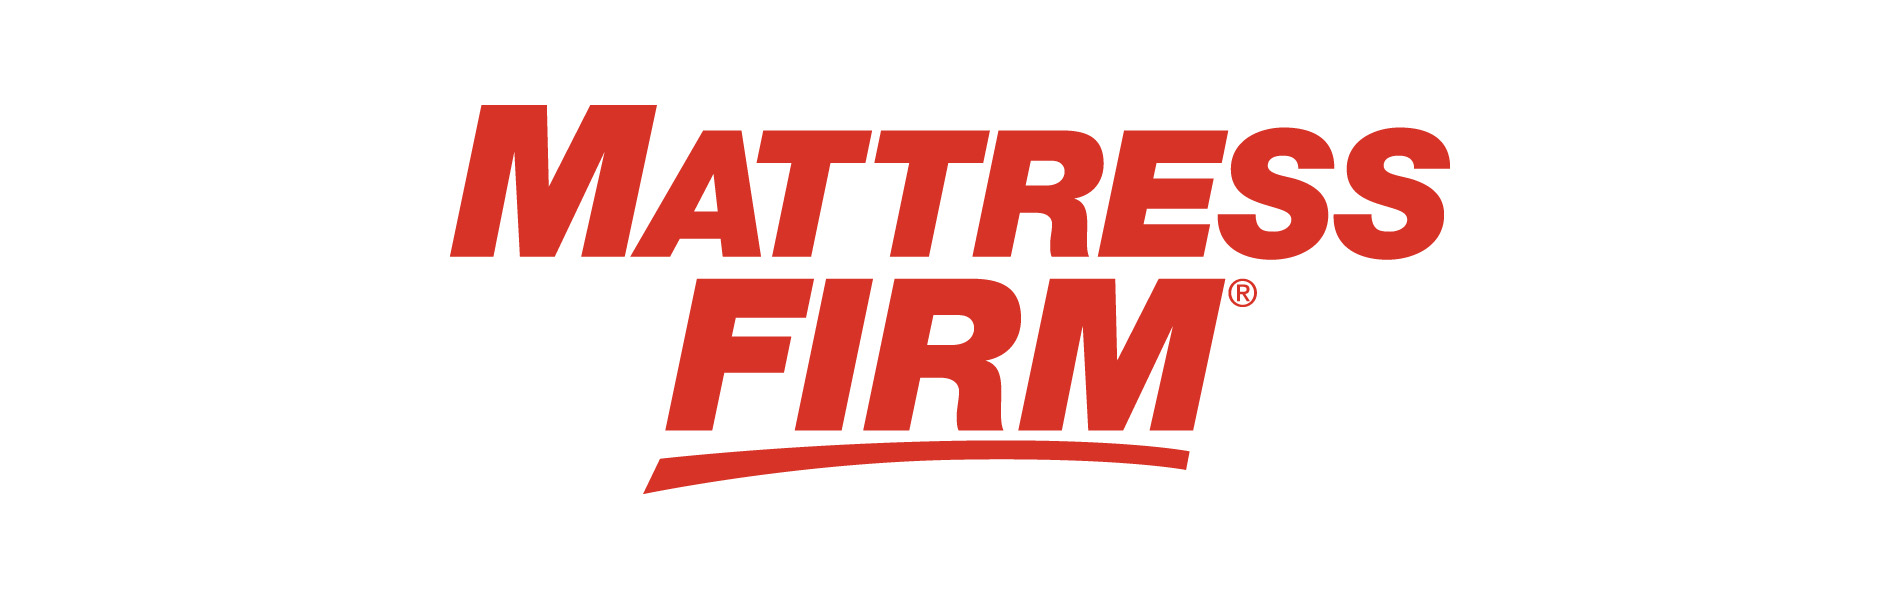 mattress-firm-selects-two-snoozeterns-for-dream-job